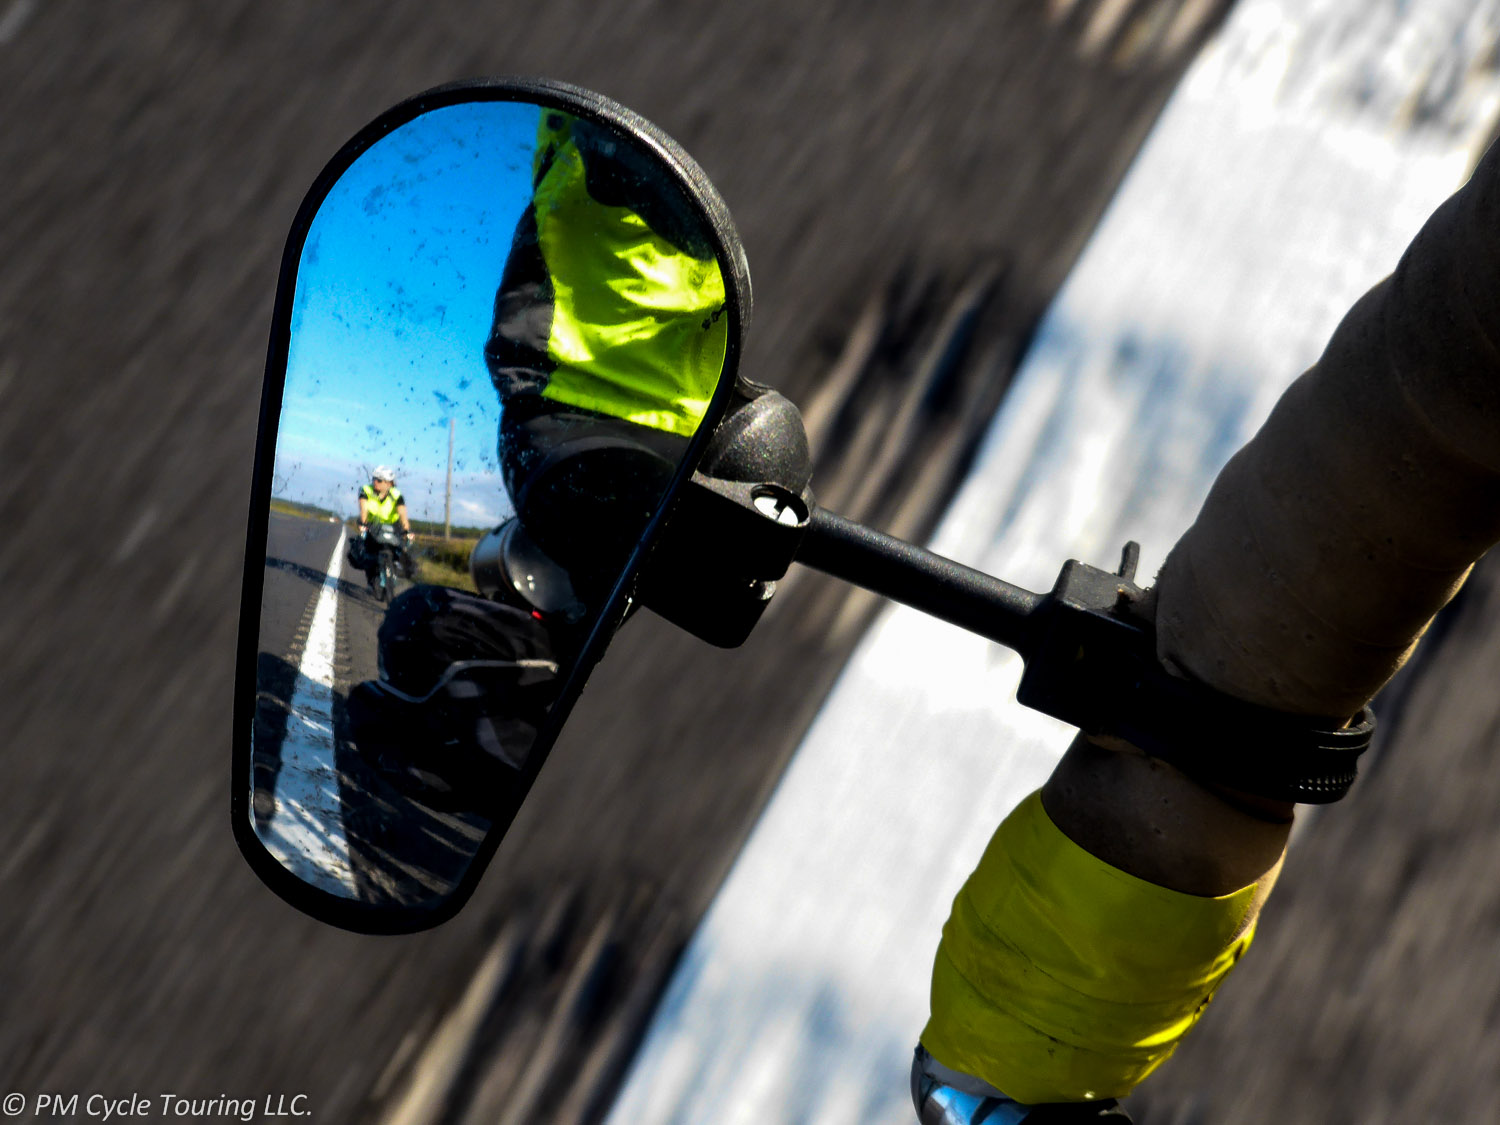 A clamp on bicycle mirror shows a cyclist behind.